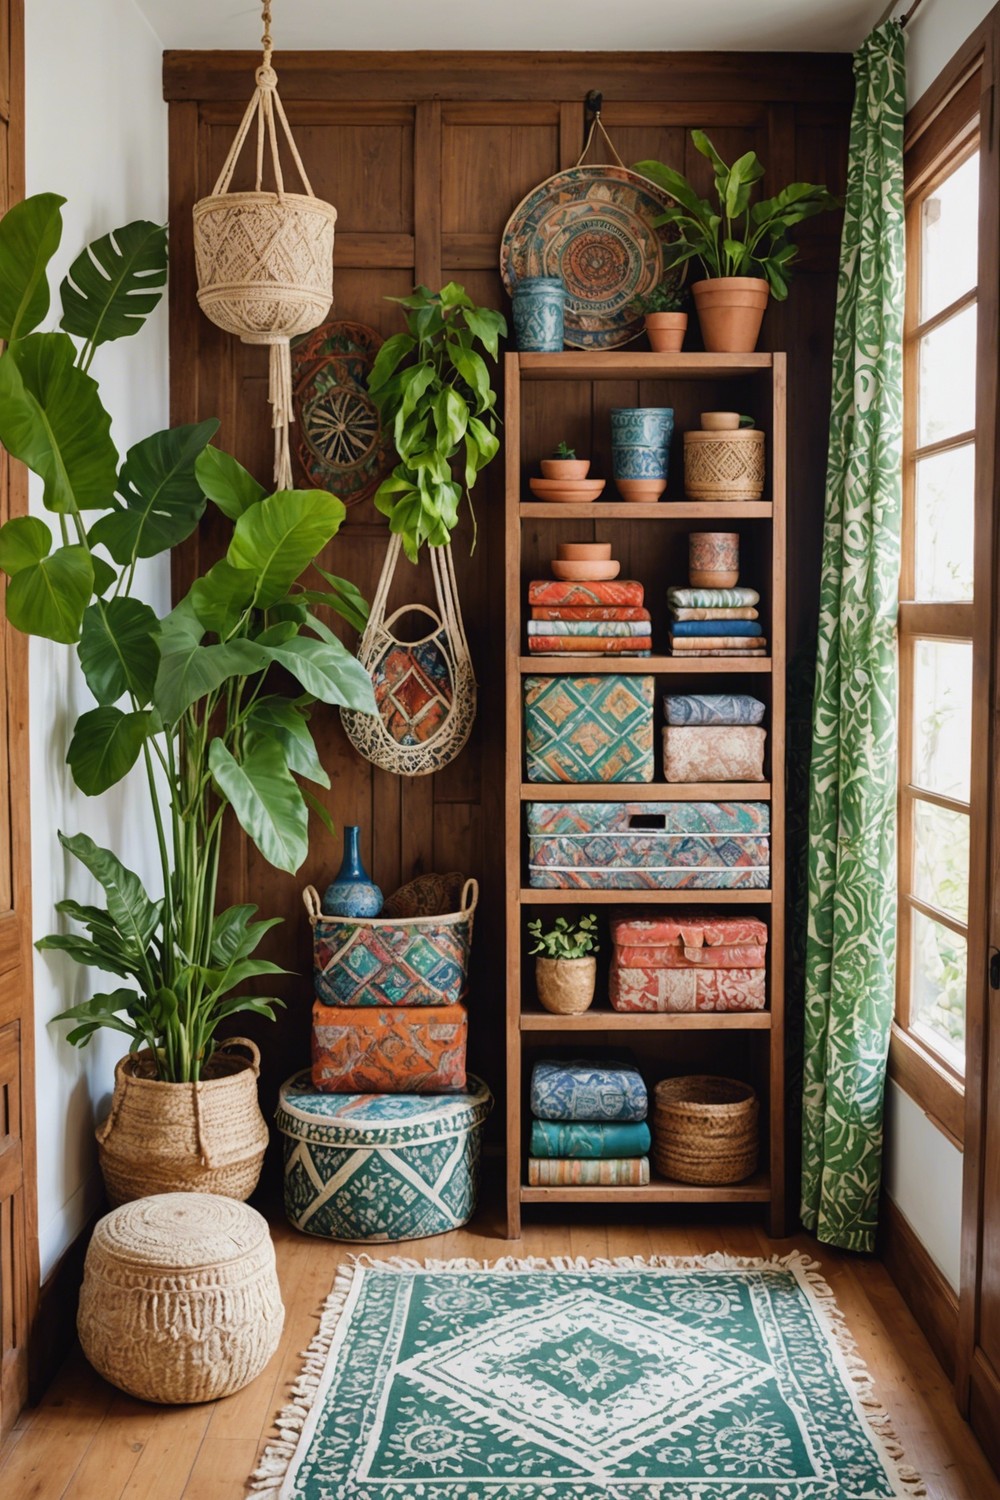 Fabric-Covered Storage Boxes with Boho Patterns